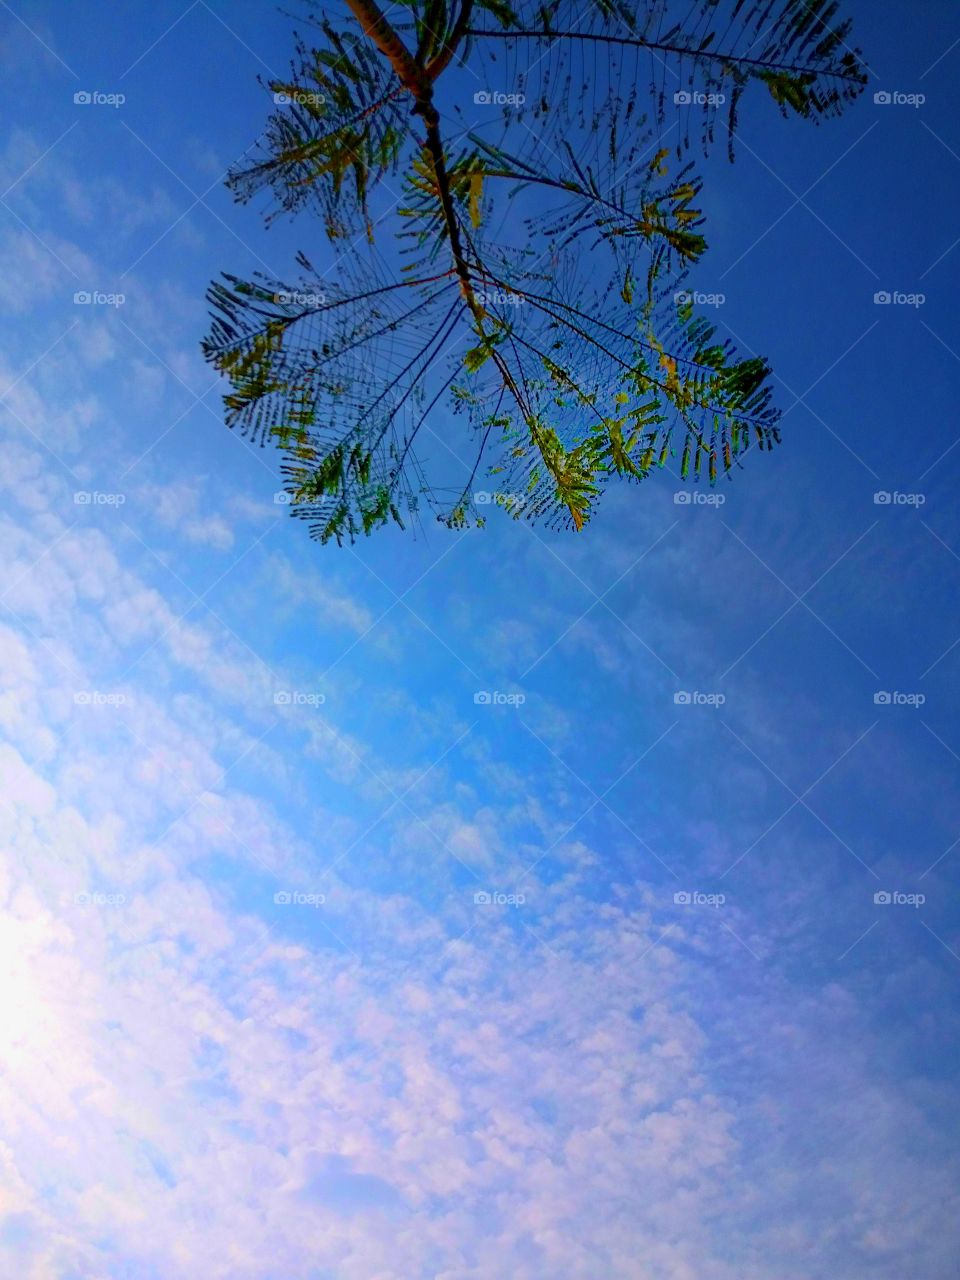 There is a beautiful blue sky. and a beautiful involvement of a some leaf. and a great shades of clouds.